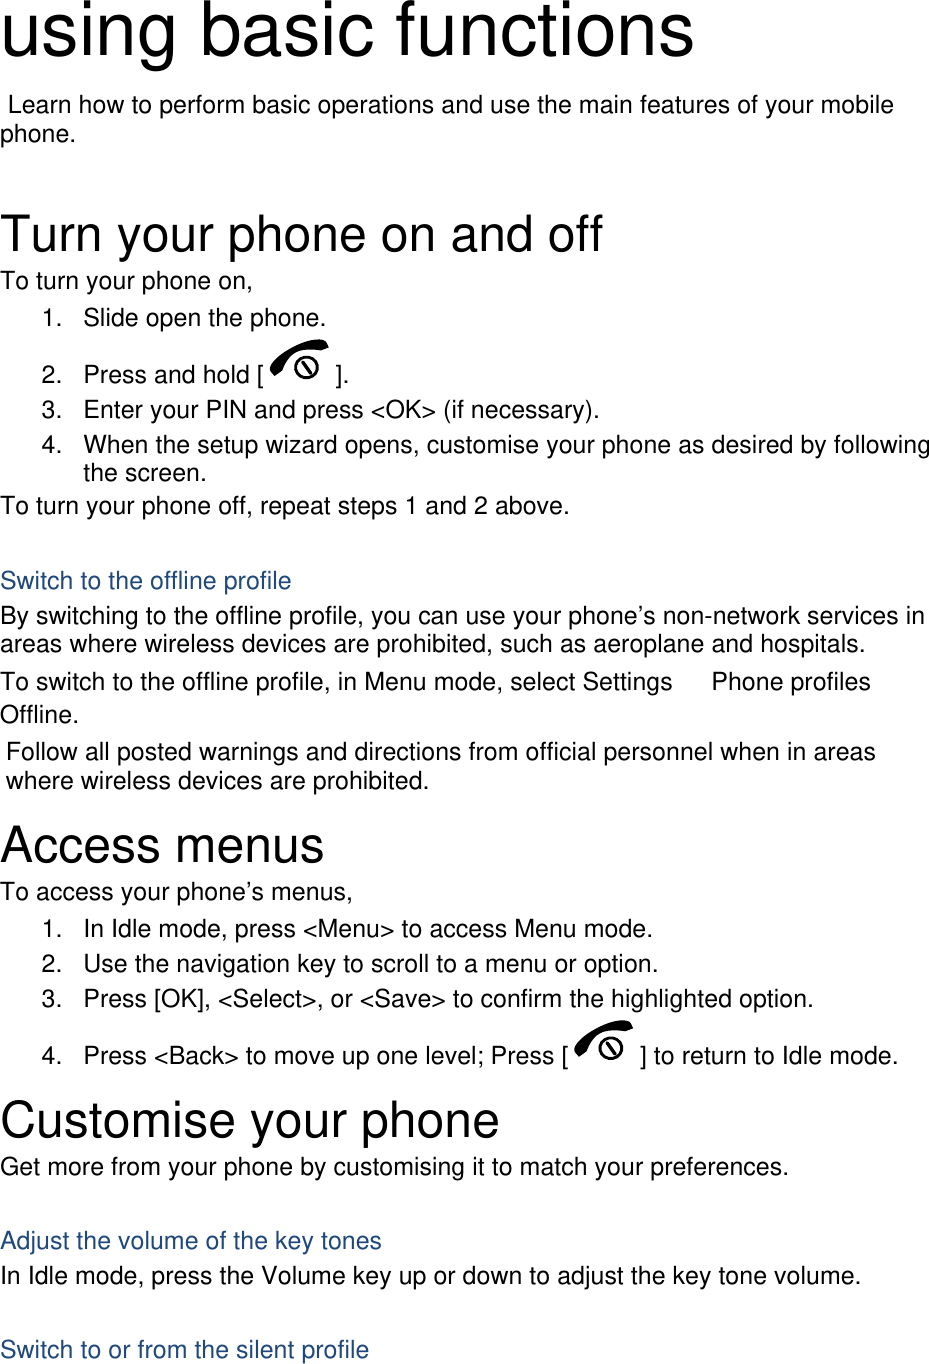  using basic functions  Learn how to perform basic operations and use the main features of your mobile phone.   Turn your phone on and off To turn your phone on, 1.  Slide open the phone. 2.  Press and hold [ ]. 3.  Enter your PIN and press &lt;OK&gt; (if necessary). 4.  When the setup wizard opens, customise your phone as desired by following the screen. To turn your phone off, repeat steps 1 and 2 above.  Switch to the offline profile By switching to the offline profile, you can use your phone’s non-network services in areas where wireless devices are prohibited, such as aeroplane and hospitals. To switch to the offline profile, in Menu mode, select Settings 　 Phone profiles 　 Offline. Follow all posted warnings and directions from official personnel when in areas where wireless devices are prohibited. Access menus To access your phone’s menus, 1.  In Idle mode, press &lt;Menu&gt; to access Menu mode. 2.  Use the navigation key to scroll to a menu or option. 3.  Press [OK], &lt;Select&gt;, or &lt;Save&gt; to confirm the highlighted option. 4.  Press &lt;Back&gt; to move up one level; Press [ ] to return to Idle mode. Customise your phone Get more from your phone by customising it to match your preferences.  Adjust the volume of the key tones In Idle mode, press the Volume key up or down to adjust the key tone volume.  Switch to or from the silent profile 